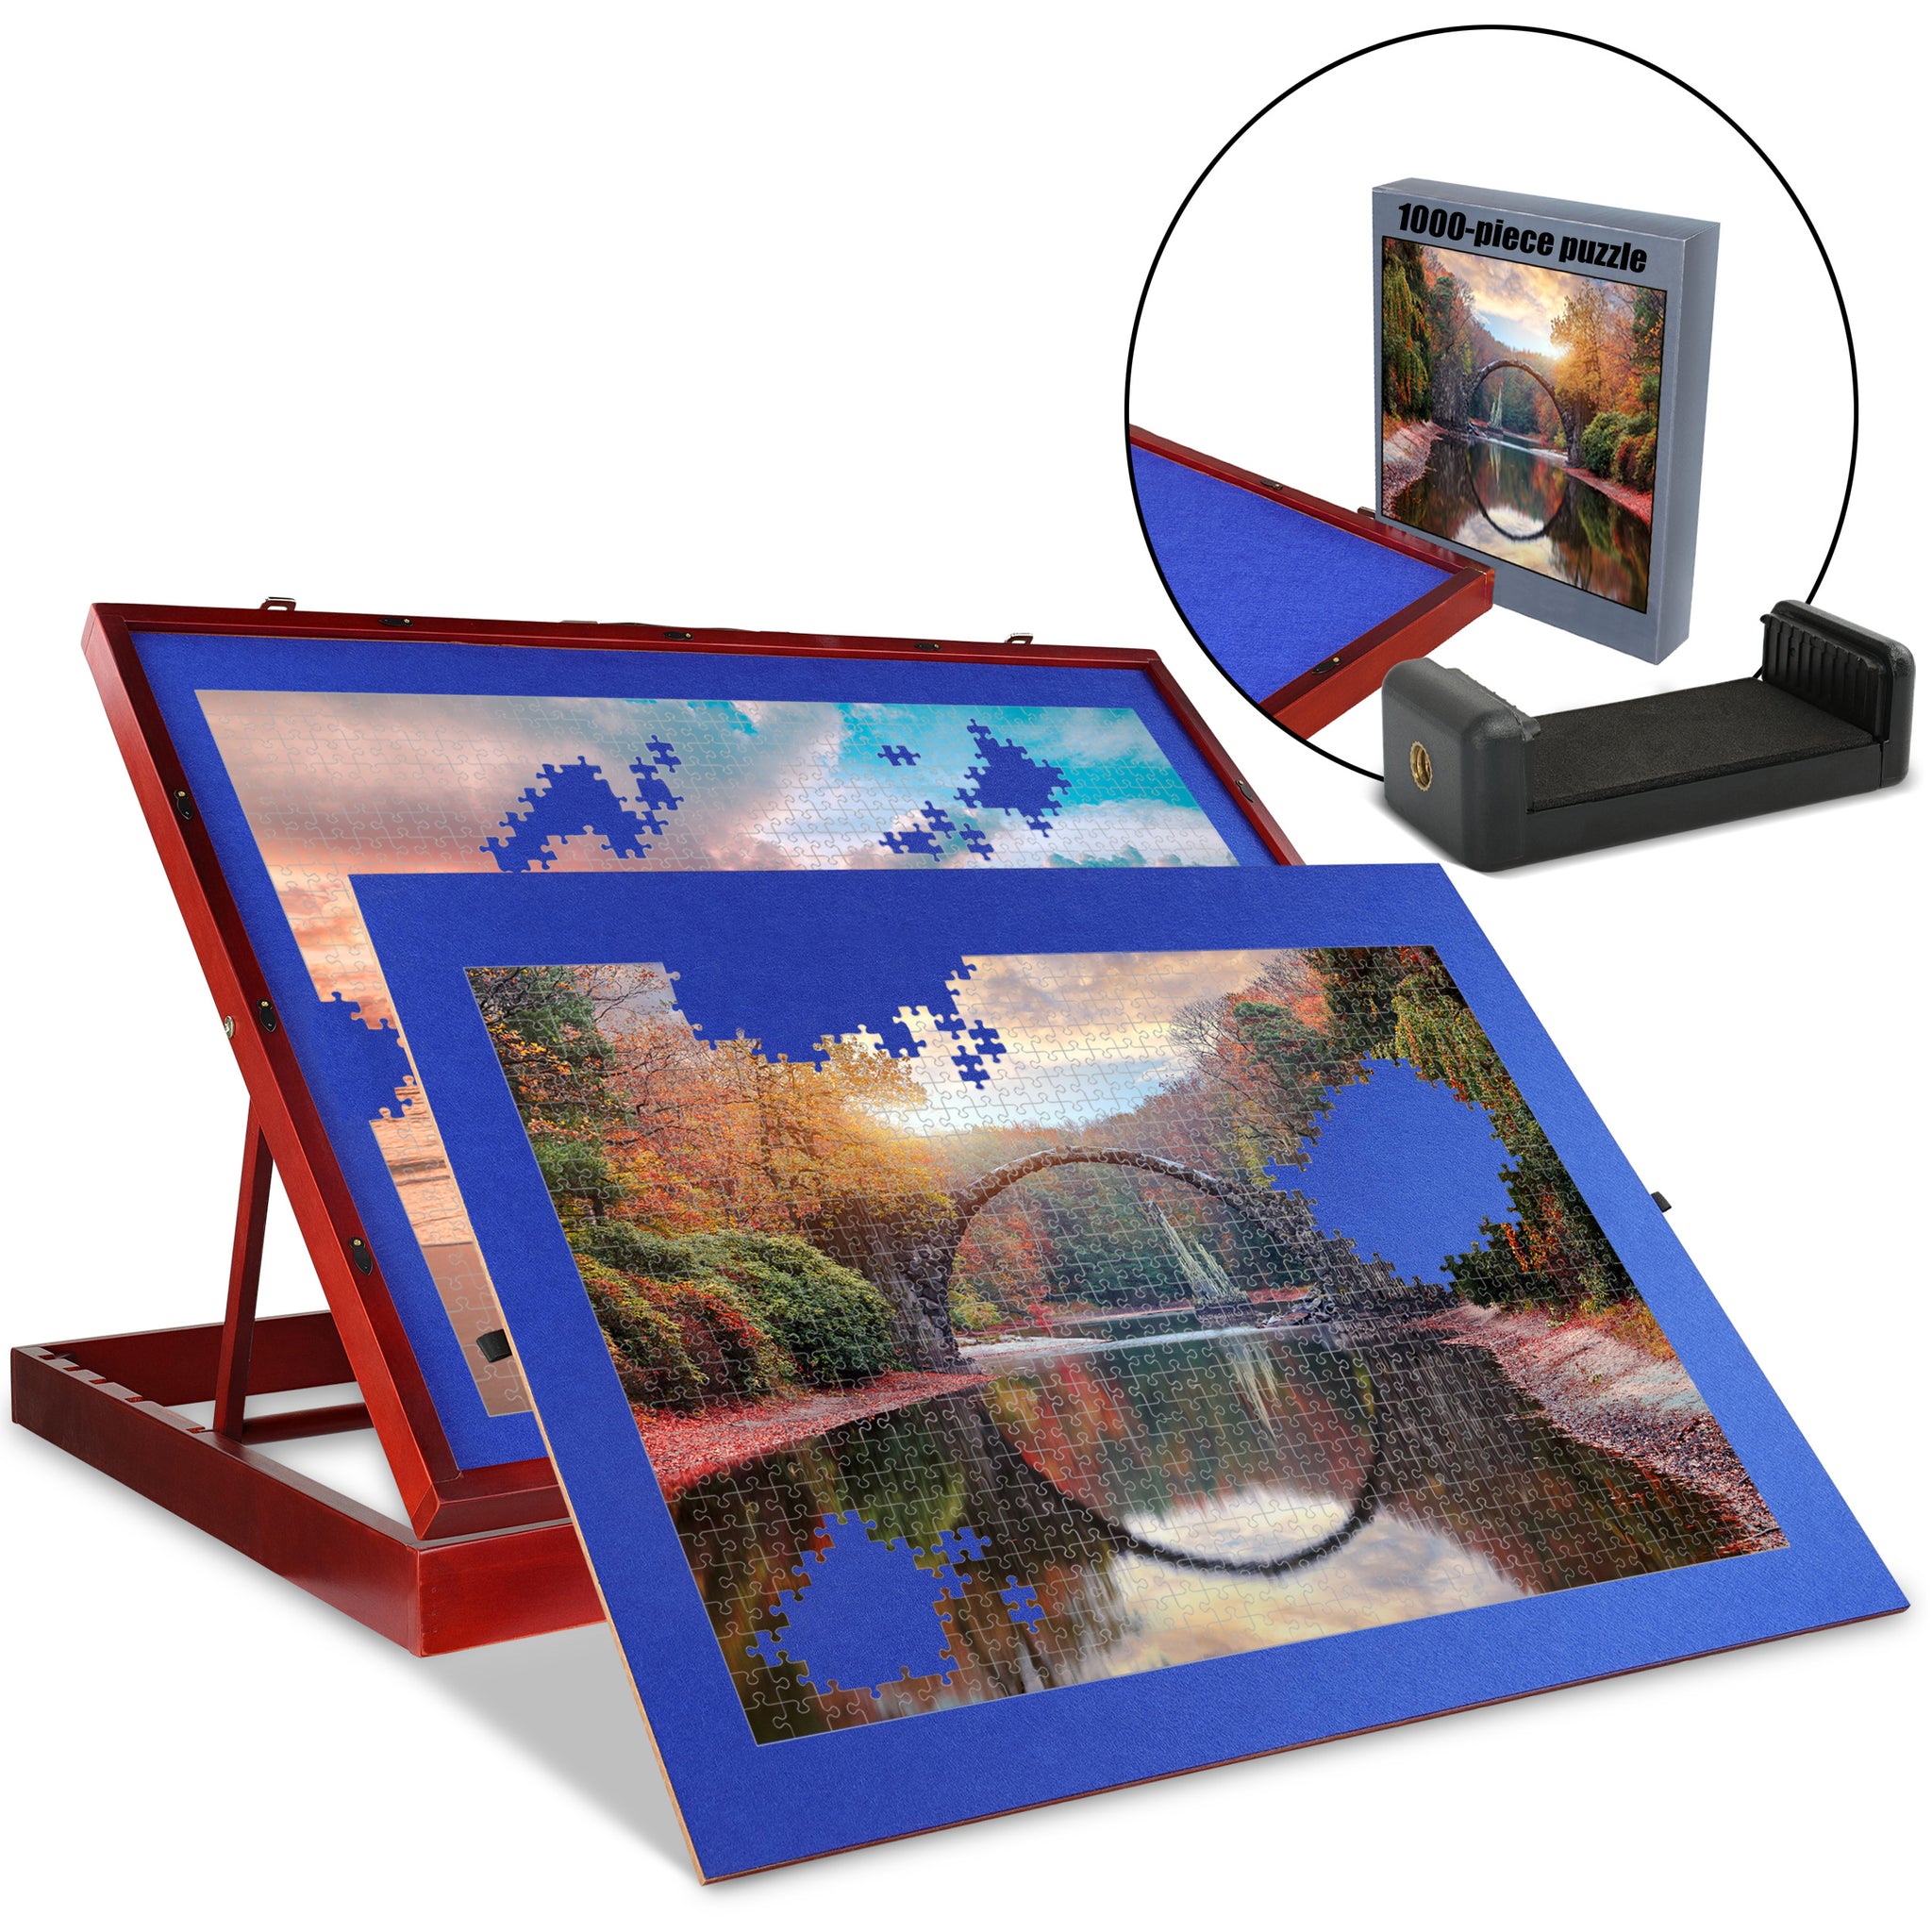 Jigsaw Puzzle Board Easel - 26x35in Puzzle and Game Table Topper